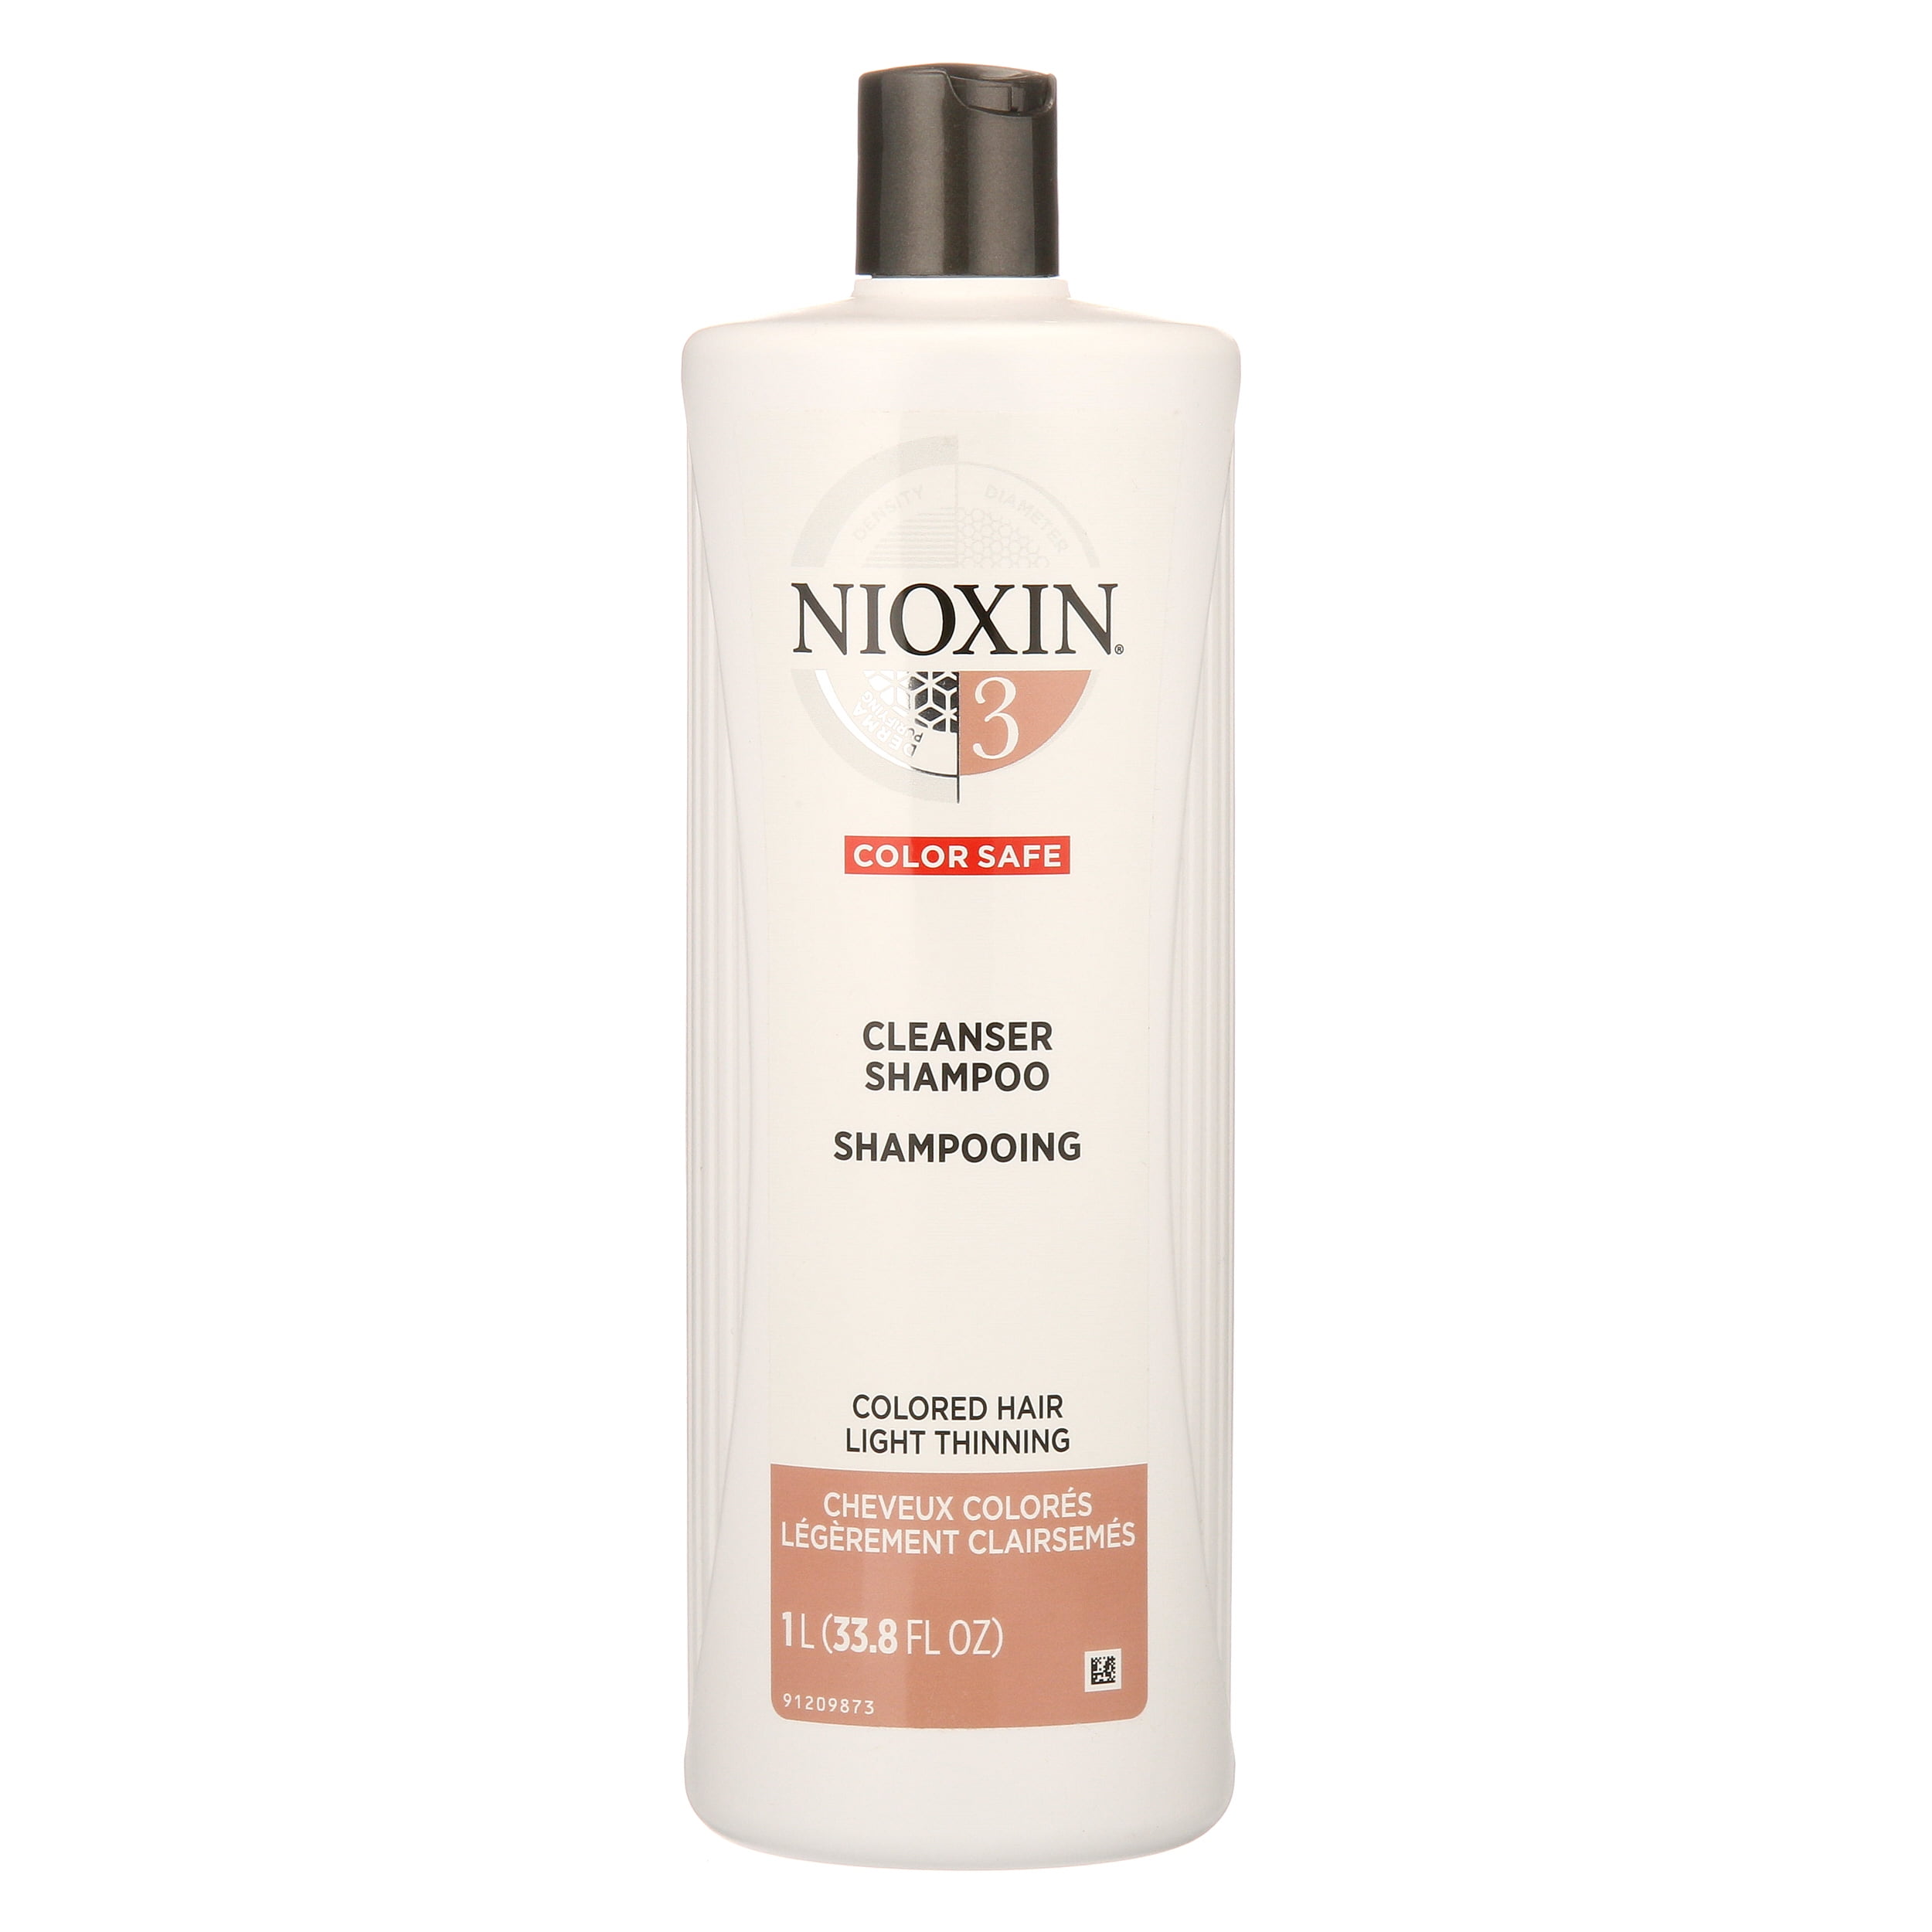 Nioxin System 3 Cleanser Shampoo, for Colored Hair/Light Thinning,  oz  